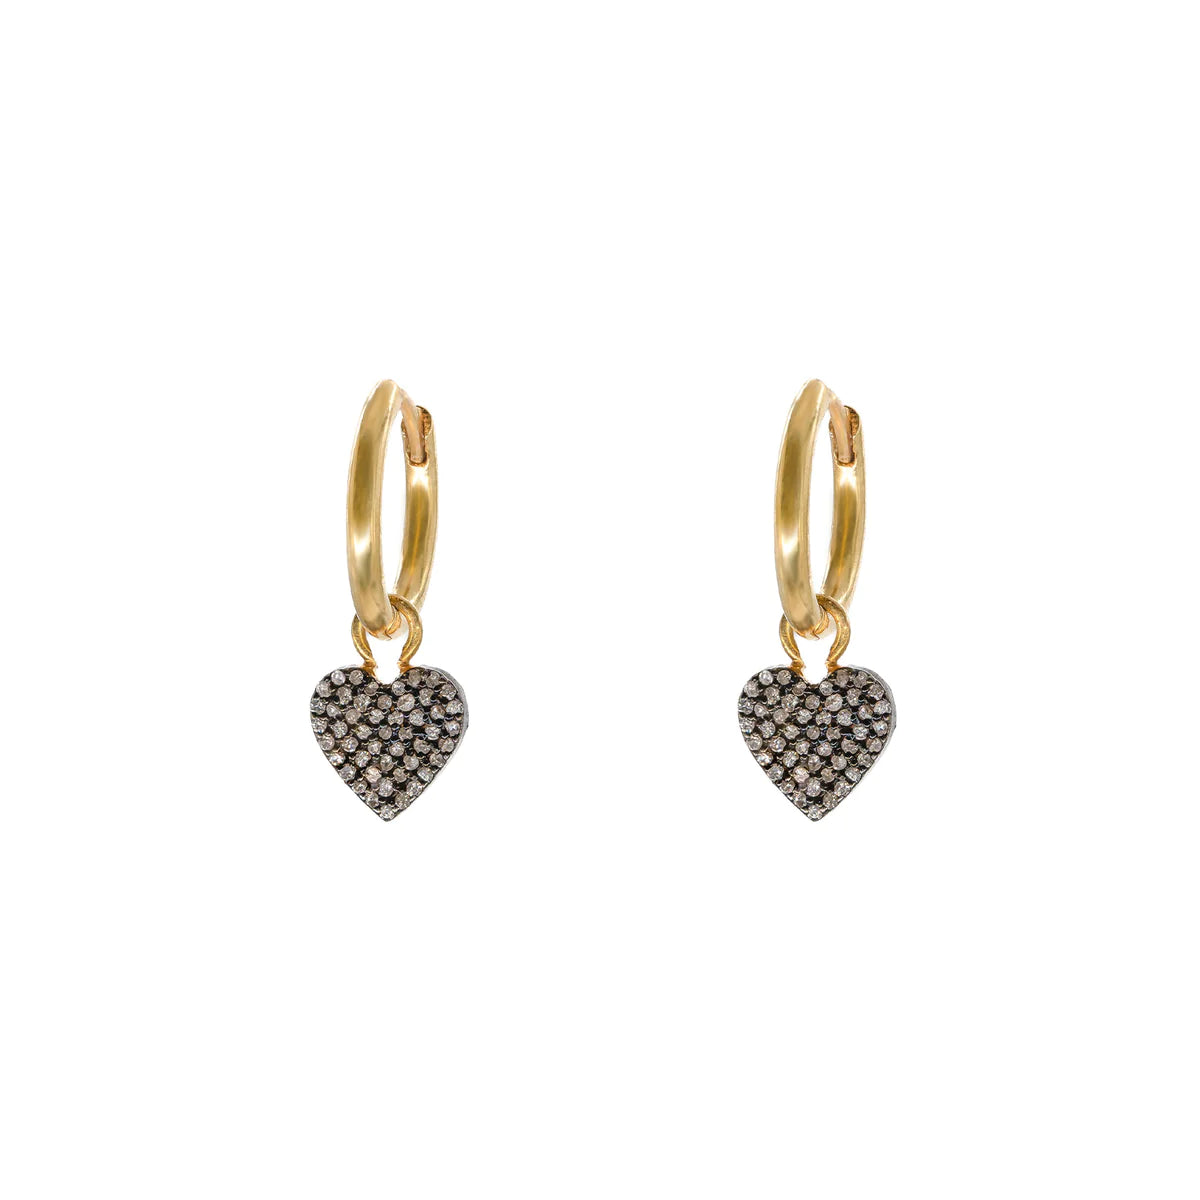 Gold hoop earrings with pave diamond heart pendant